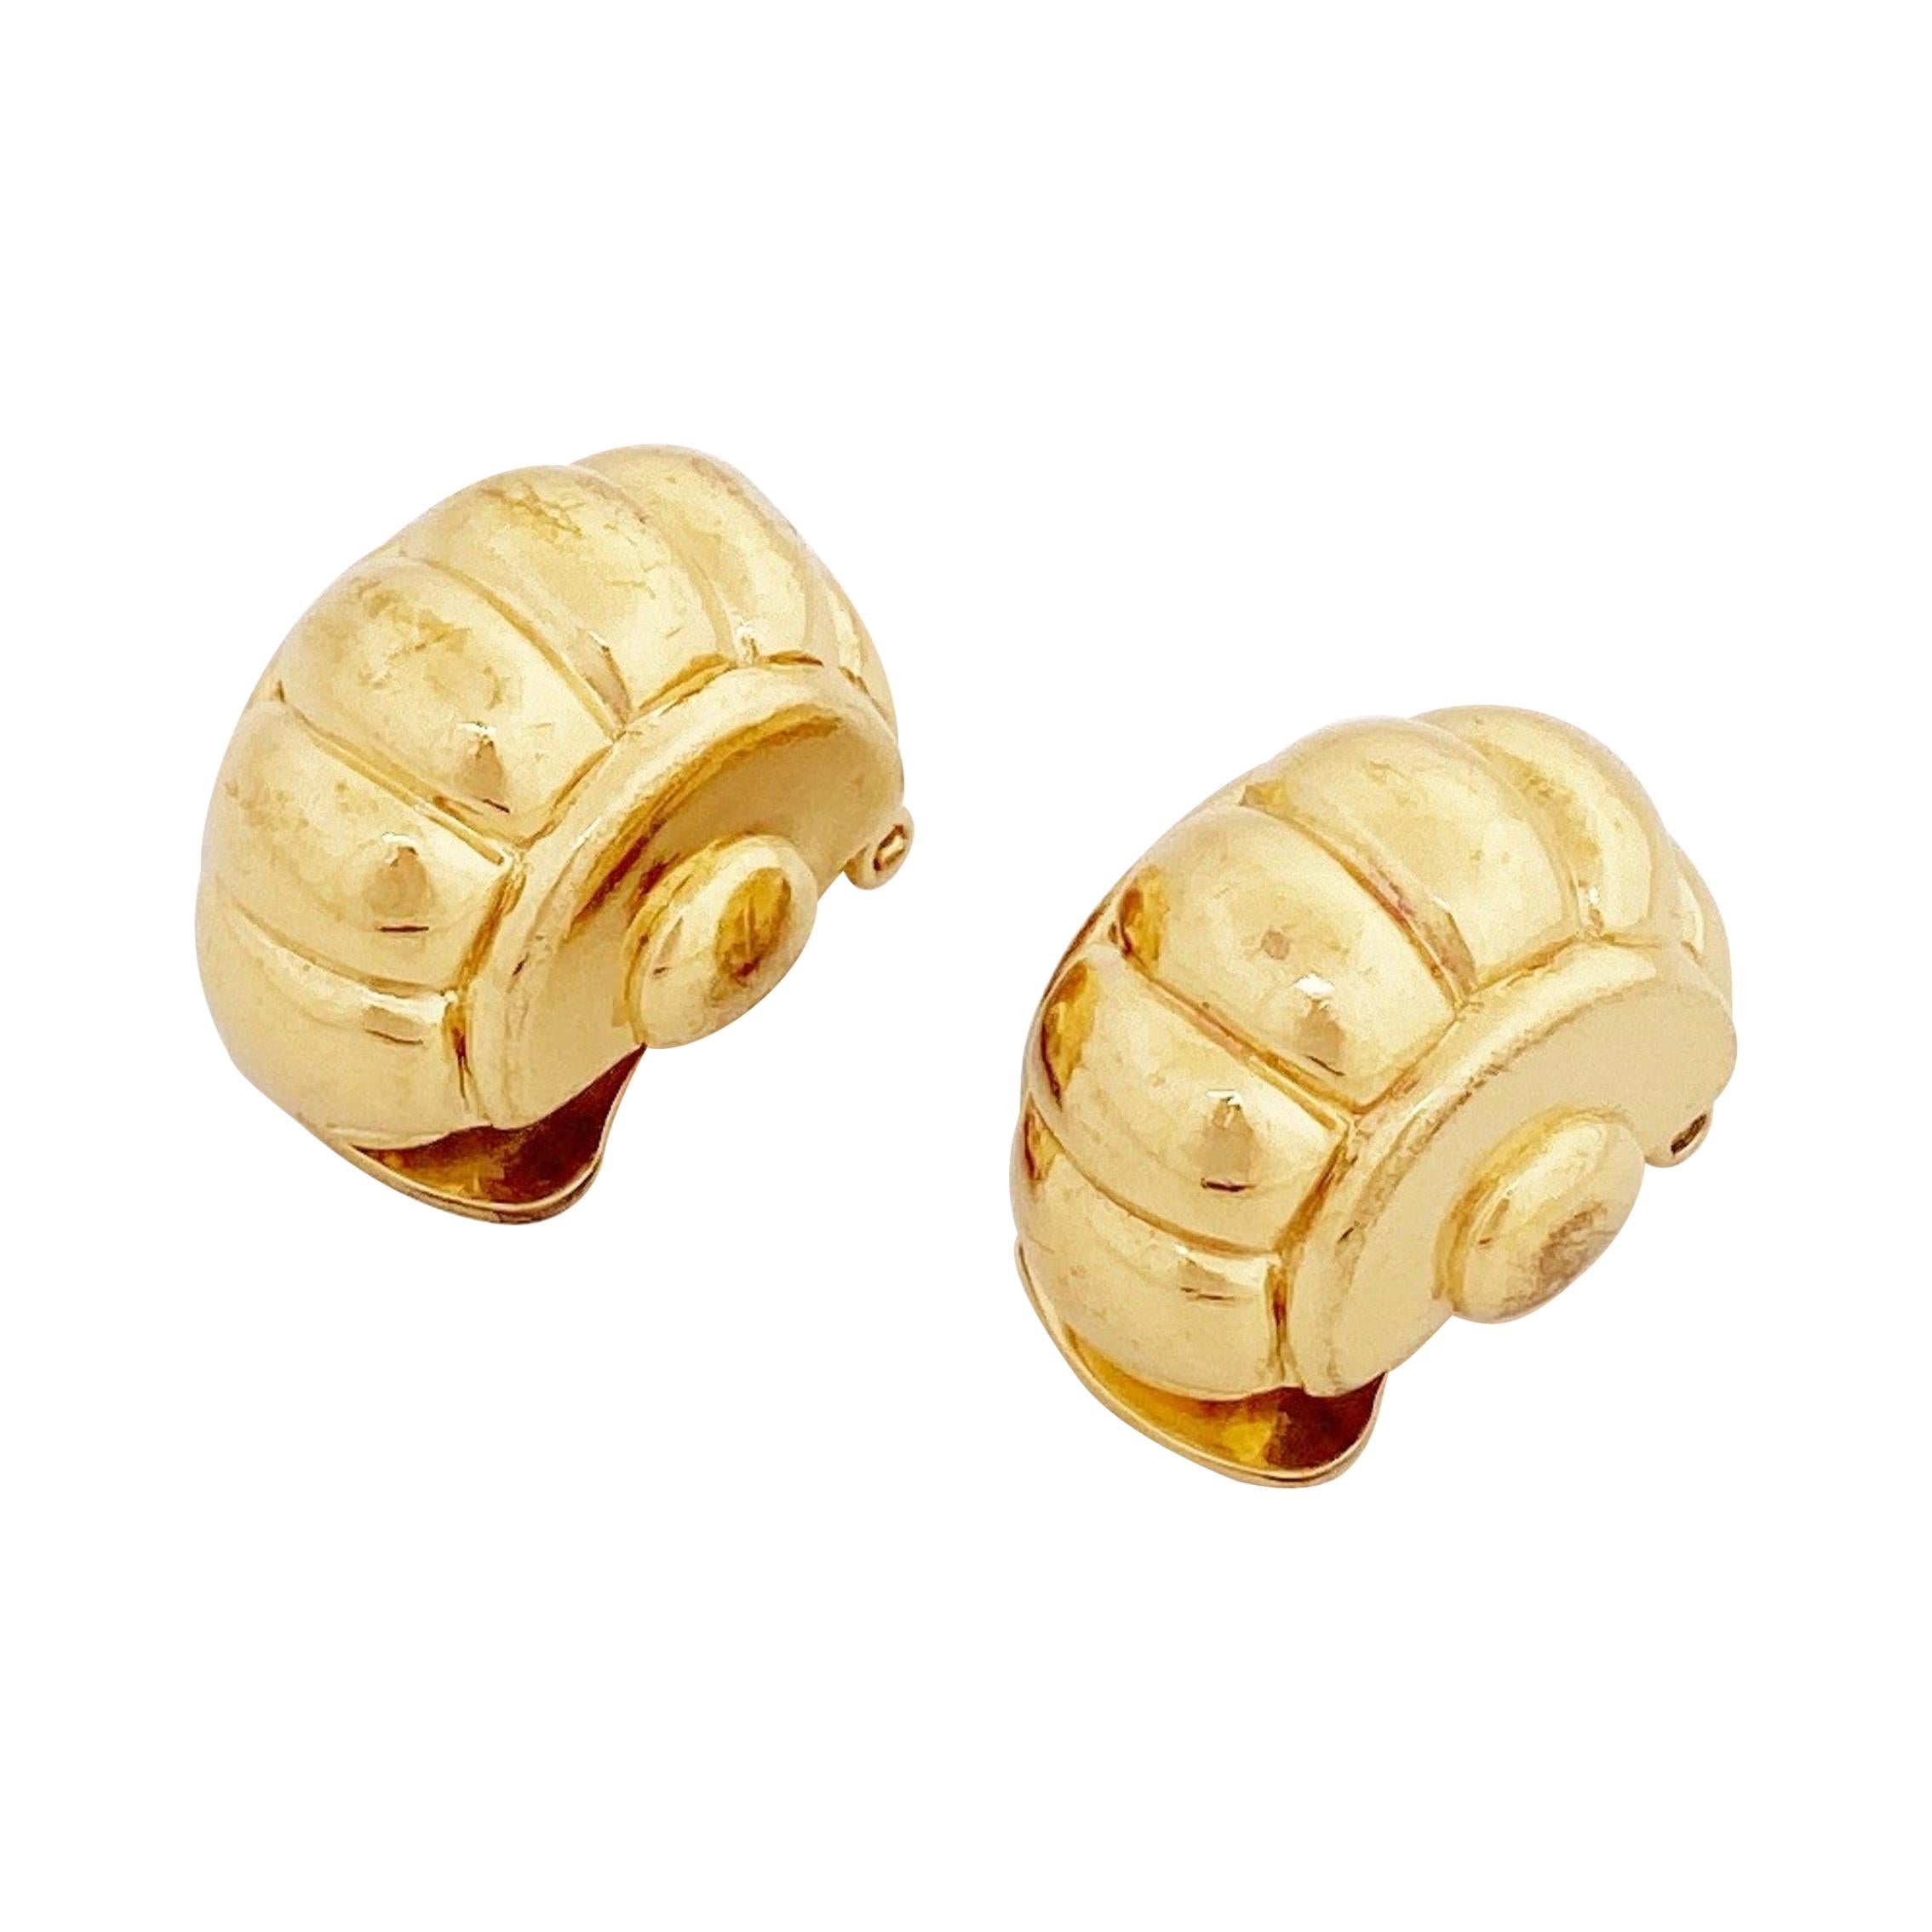 Gilt Scalloped Dome Earrings By Vogue Bijoux, 1980s